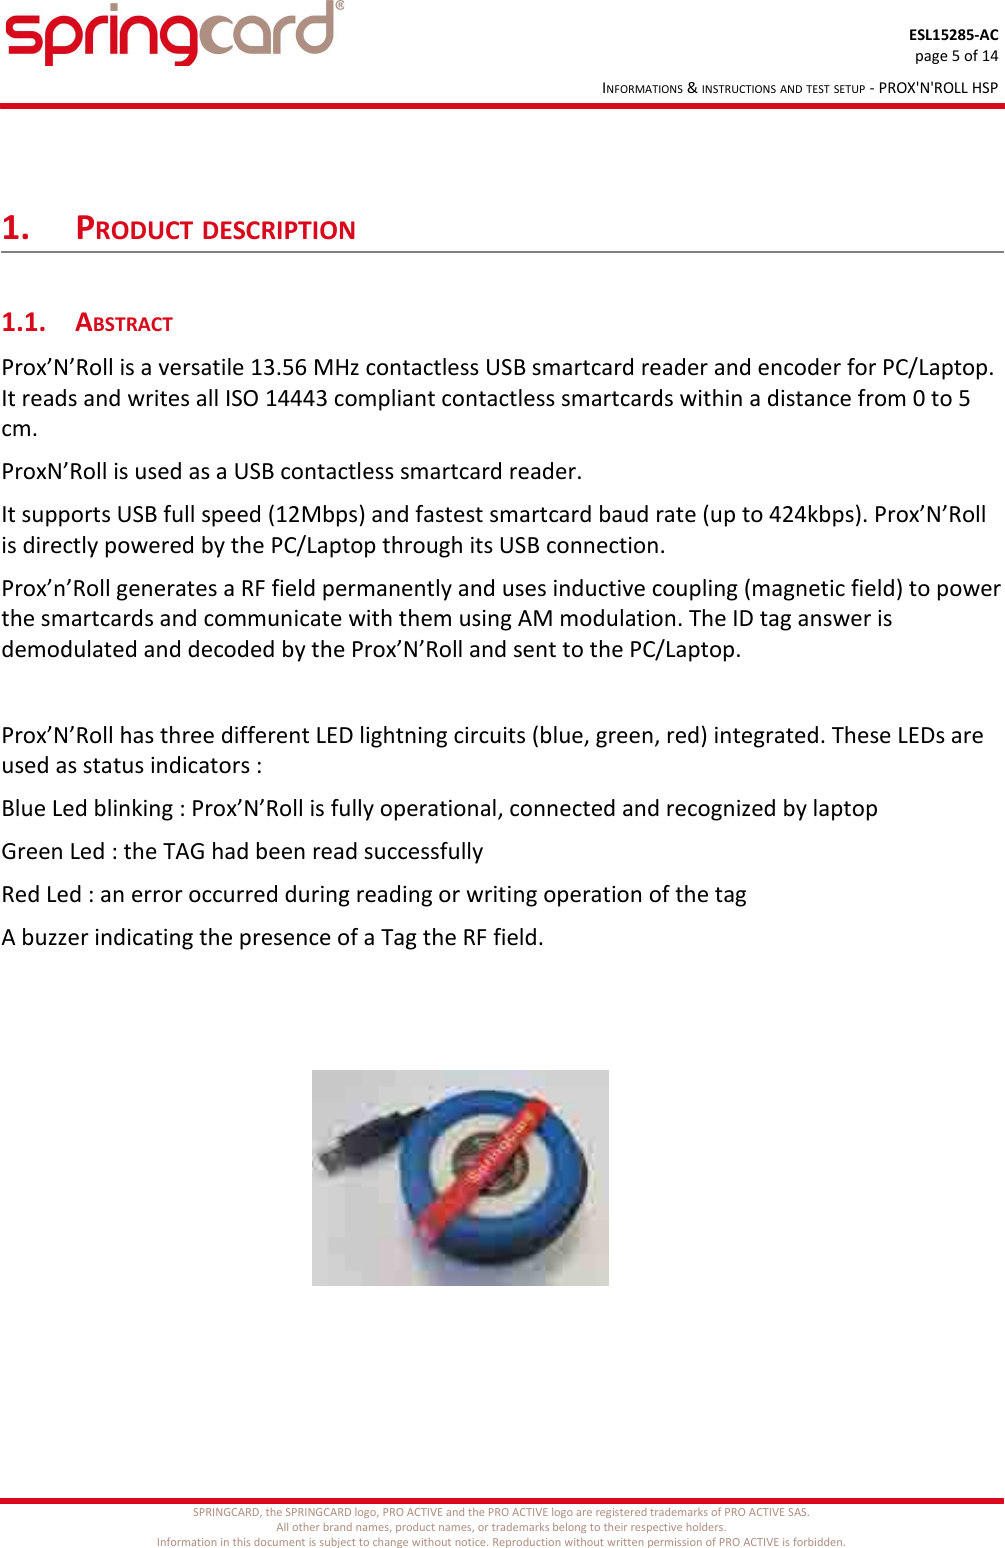 ESL15285-ACpage 5 of 14INFORMATIONS &amp; INSTRUCTIONS AND TEST SETUP - PROX&apos;N&apos;ROLL HSP1. PRODUCT DESCRIPTION1.1. ABSTRACTProx’N’Roll is a versatile 13.56 MHz contactless USB smartcard reader and encoder for PC/Laptop. It reads and writes all ISO 14443 compliant contactless smartcards within a distance from 0 to 5 cm.ProxN’Roll is used as a USB contactless smartcard reader.It supports USB full speed (12Mbps) and fastest smartcard baud rate (up to 424kbps). Prox’N’Roll is directly powered by the PC/Laptop through its USB connection.Prox’n’Roll generates a RF field permanently and uses inductive coupling (magnetic field) to powerthe smartcards and communicate with them using AM modulation. The ID tag answer is demodulated and decoded by the Prox’N’Roll and sent to the PC/Laptop. Prox’N’Roll has three different LED lightning circuits (blue, green, red) integrated. These LEDs are used as status indicators :Blue Led blinking : Prox’N’Roll is fully operational, connected and recognized by laptopGreen Led : the TAG had been read successfullyRed Led : an error occurred during reading or writing operation of the tagA buzzer indicating the presence of a Tag the RF field.SPRINGCARD, the SPRINGCARD logo, PRO ACTIVE and the PRO ACTIVE logo are registered trademarks of PRO ACTIVE SAS.All other brand names, product names, or trademarks belong to their respective holders.Information in this document is subject to change without notice. Reproduction without written permission of PRO ACTIVE is forbidden.